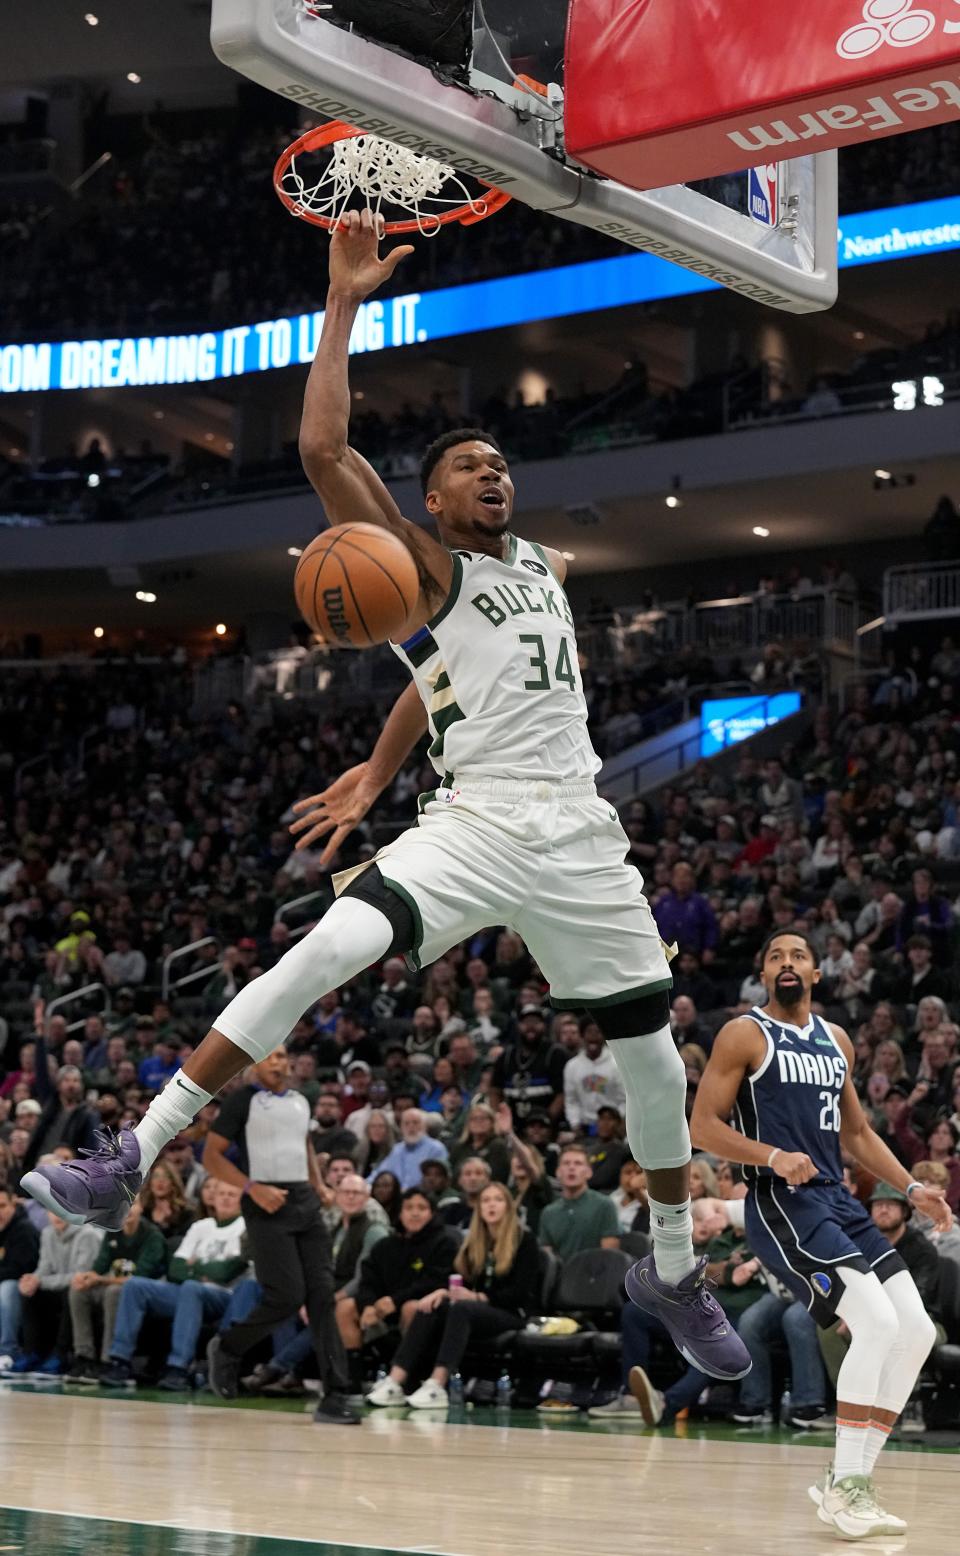 Milwaukee Bucks forward Giannis Antetokounmpo (34) throws down a dunk during the second half of their game Sunday, November 27, 2022 at Fiserv Forum in Milwaukee, Wis. The Milwaukee Bucks beat the Dallas Mavericks 124-115.